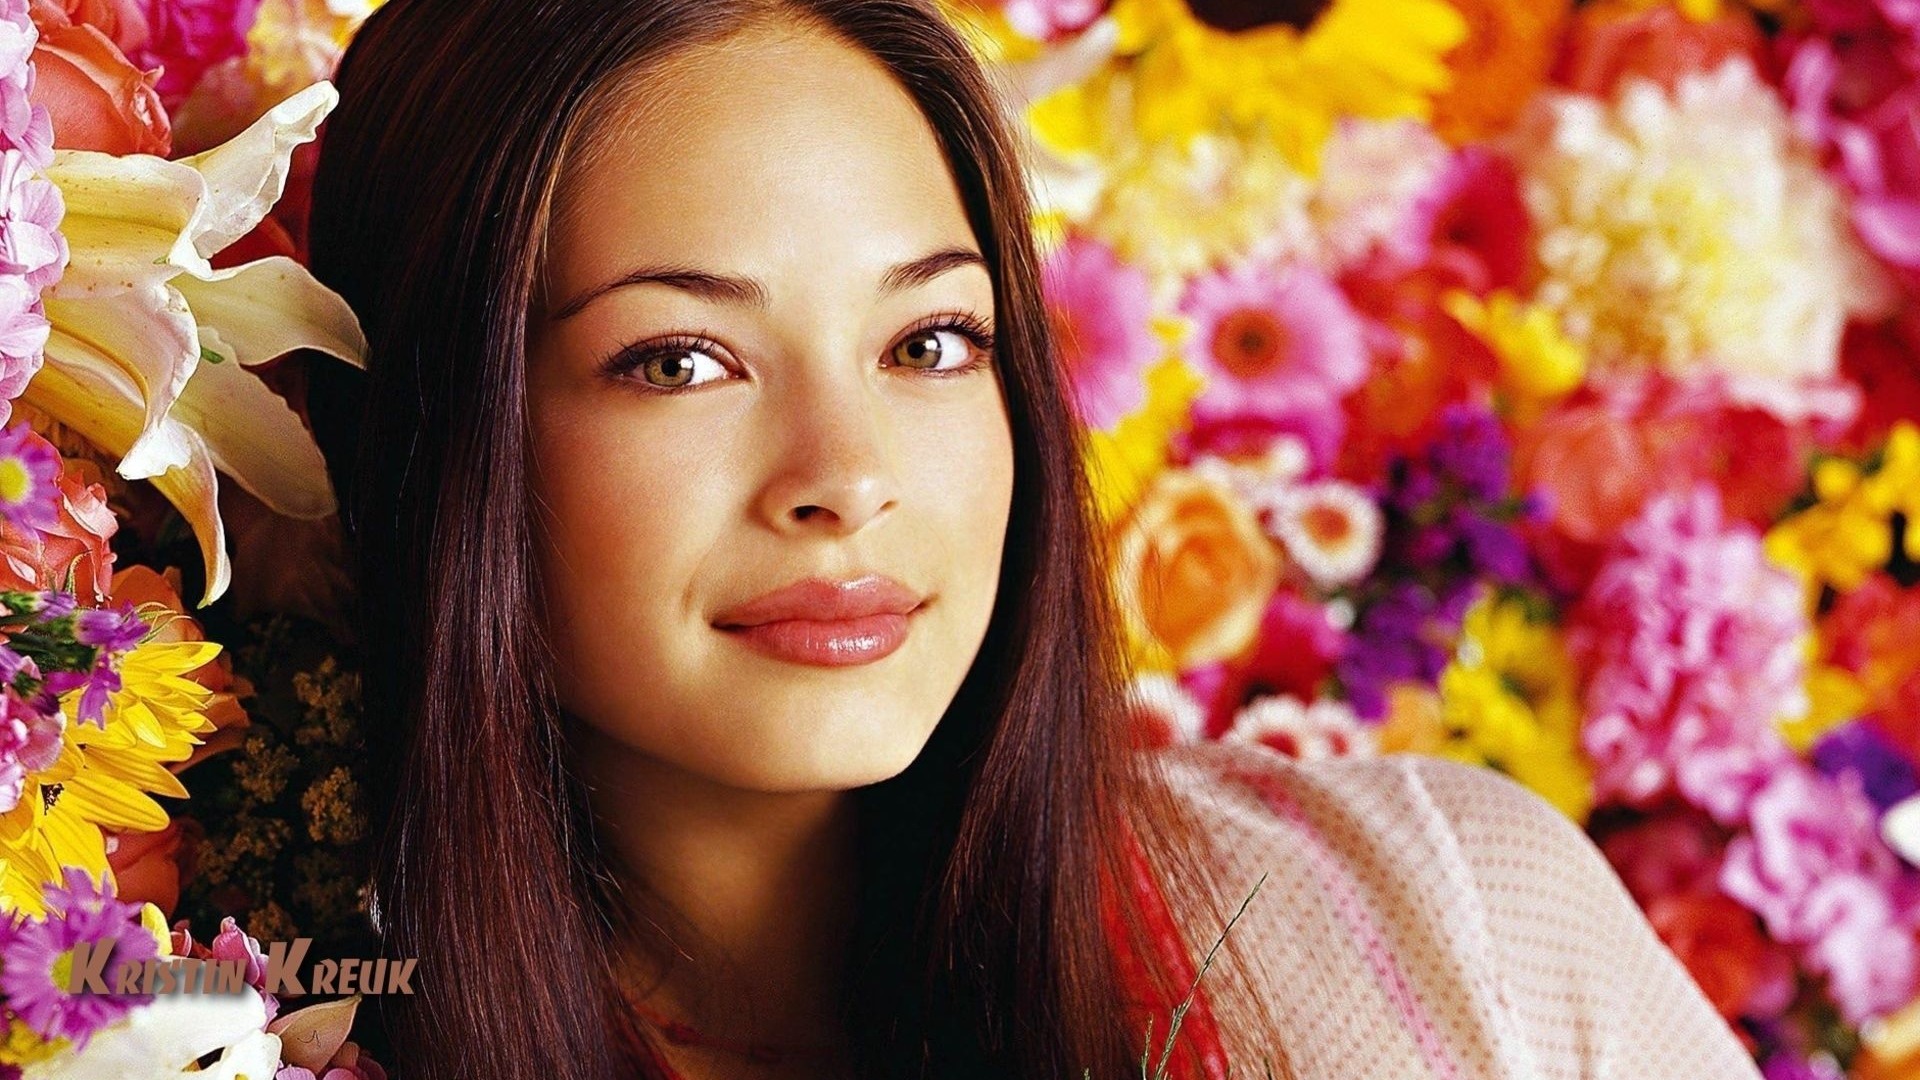 Kristin Kreuk #006 - 1920x1080 Wallpapers Pictures Photos Images